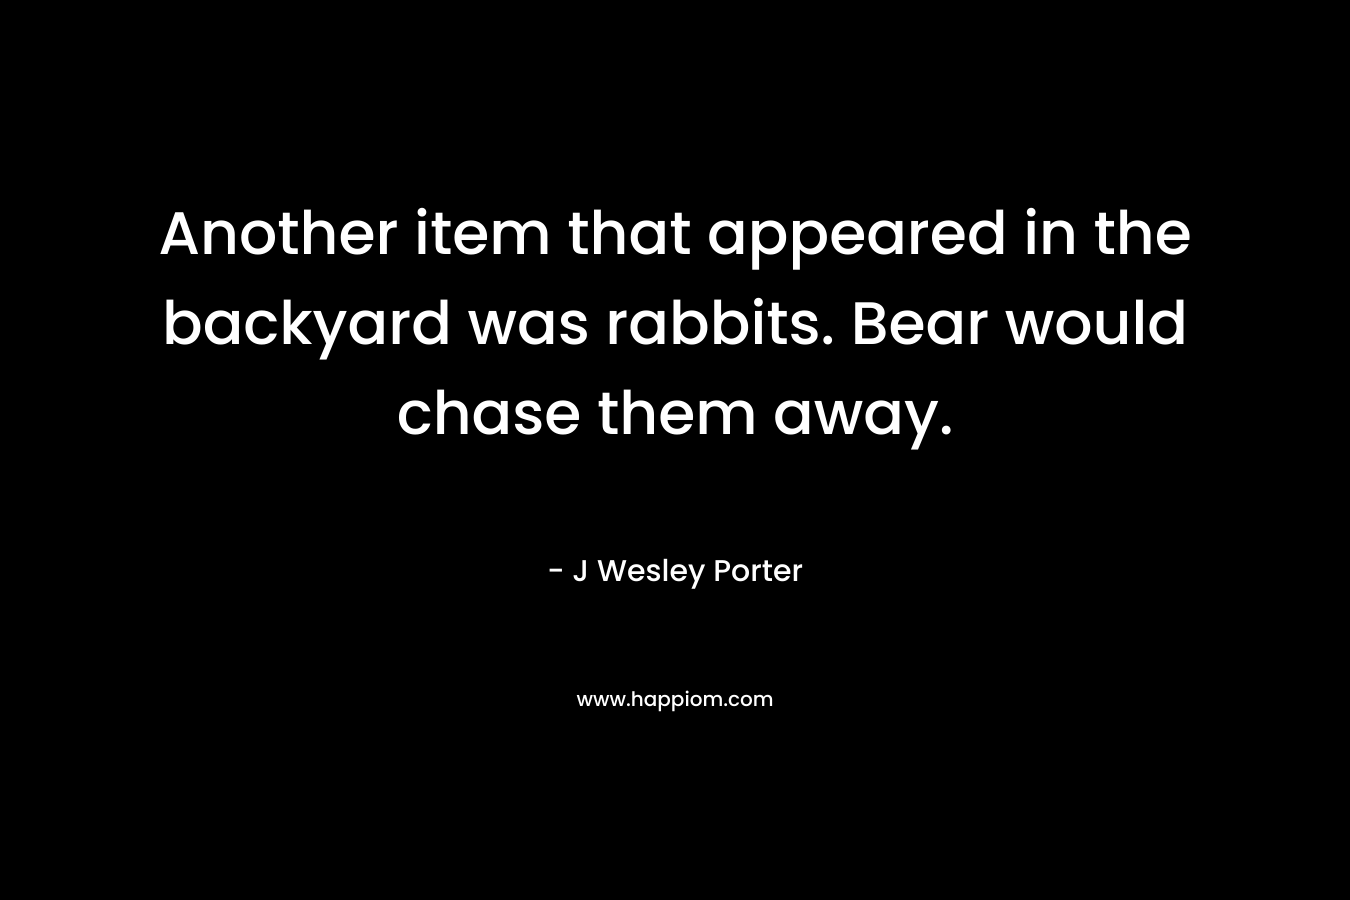 Another item that appeared in the backyard was rabbits. Bear would chase them away. – J Wesley Porter